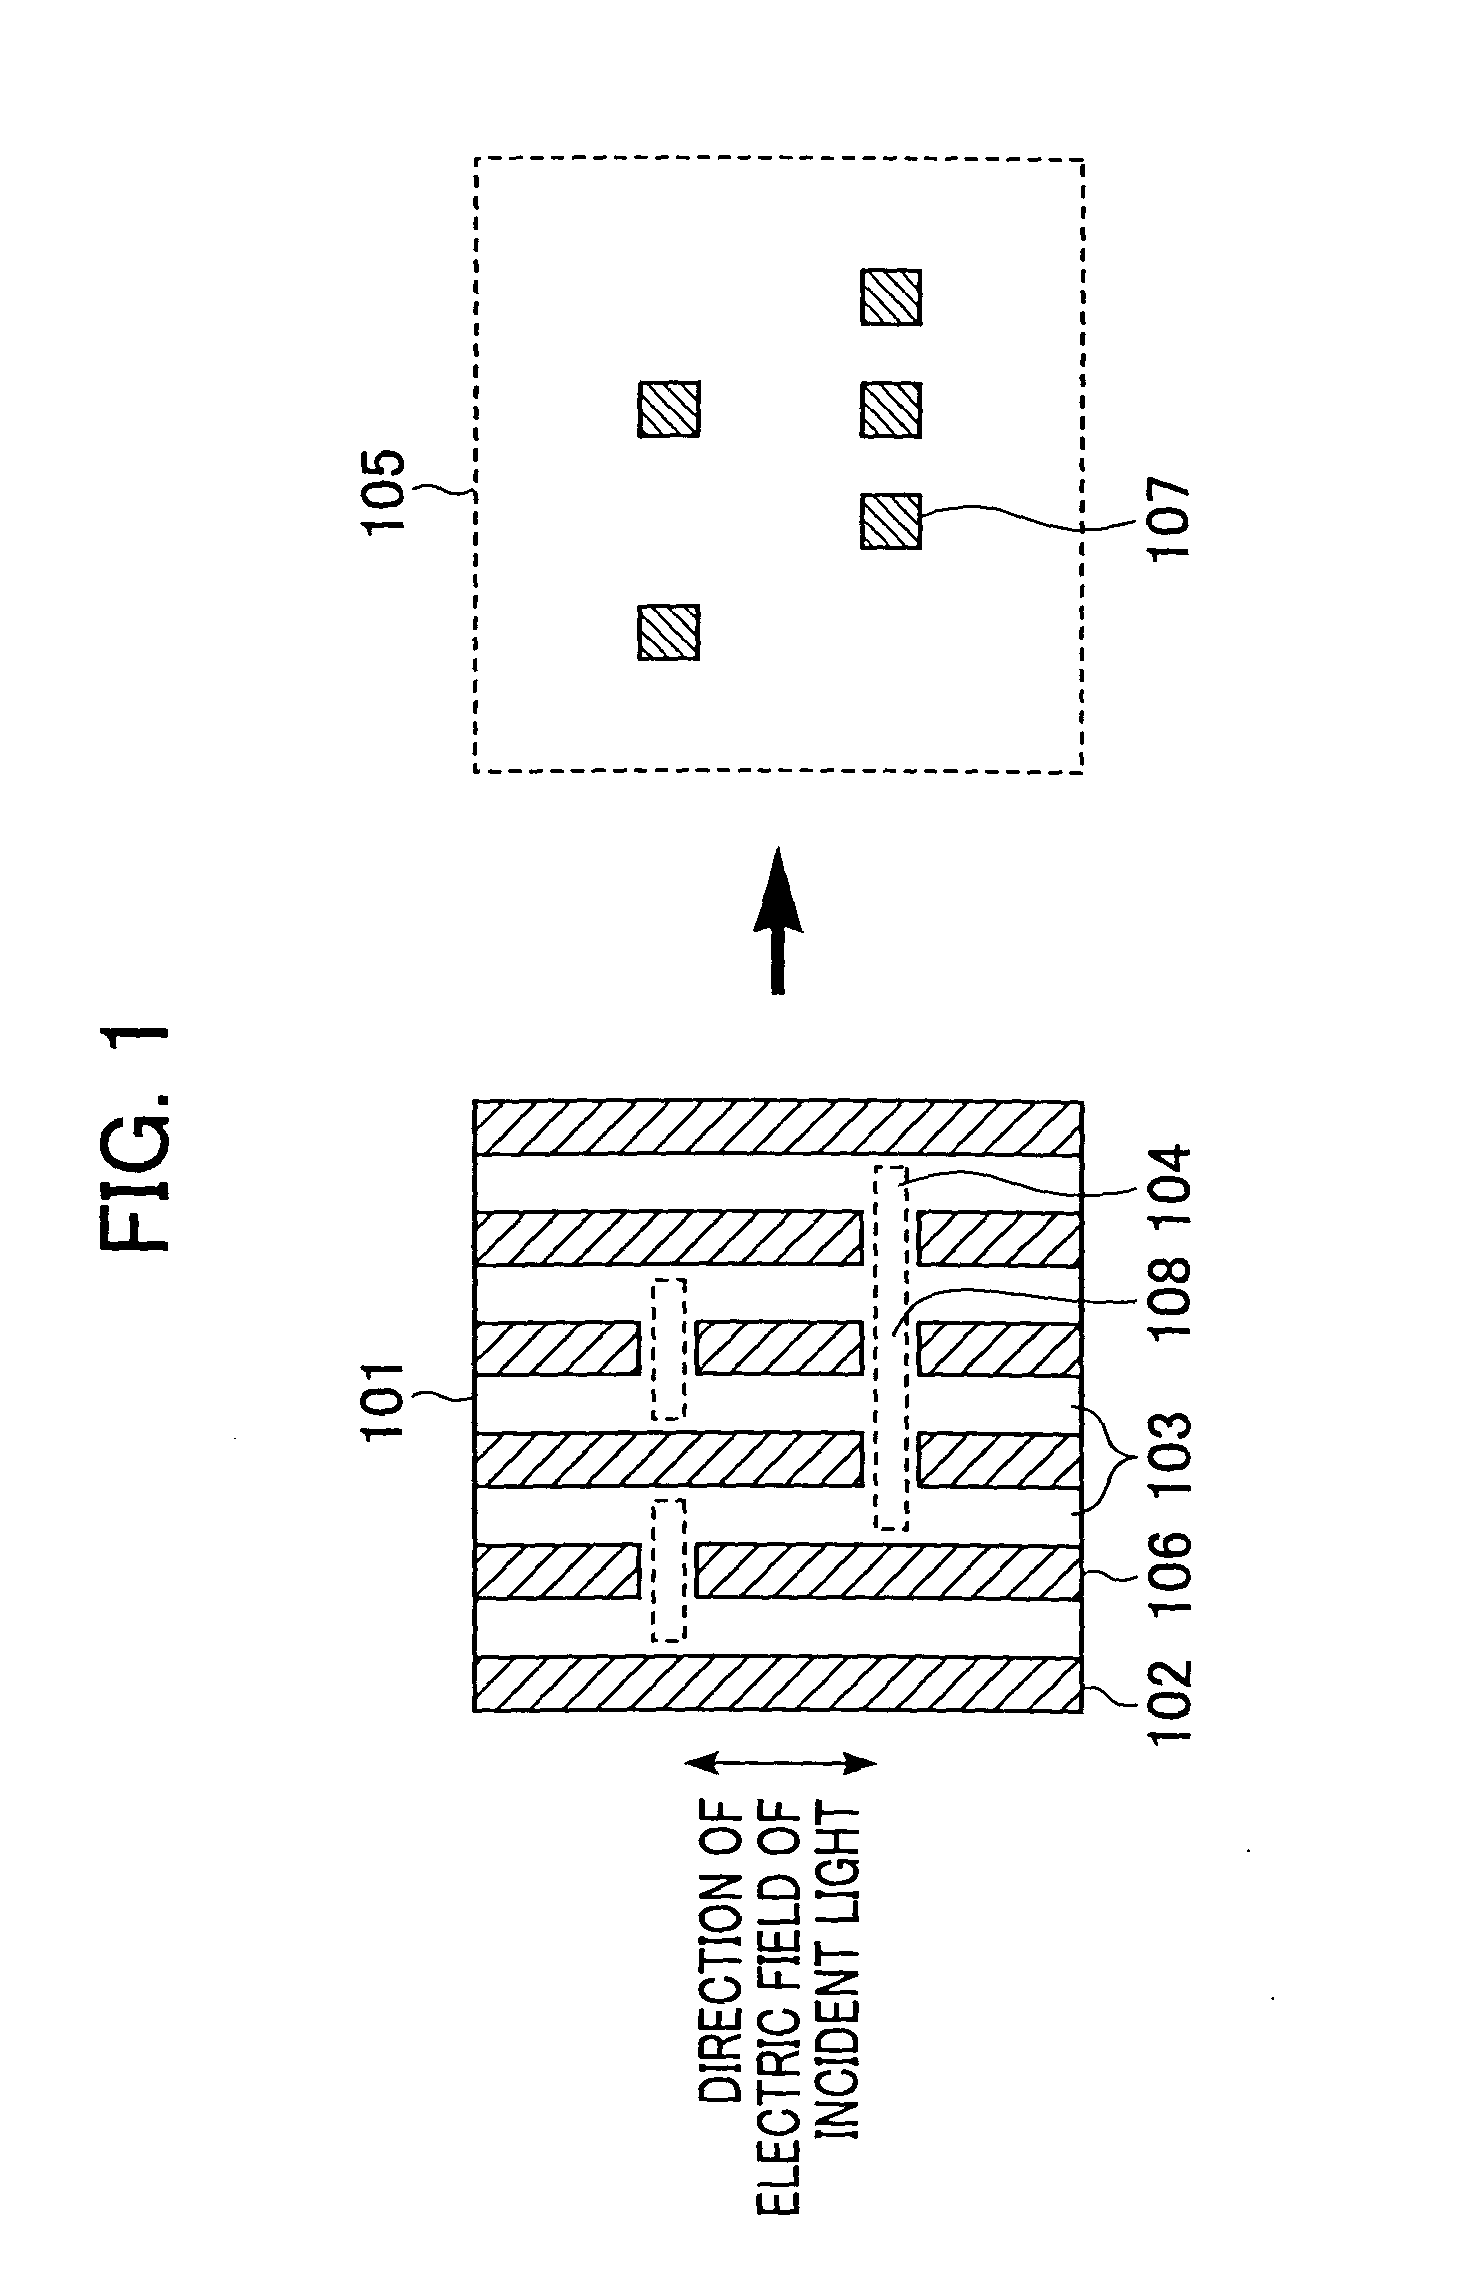 Near-field photomask, near-field exposure apparatus using the photomask, dot pattern forming method using the exposure apparatus, and device manufactured using the method